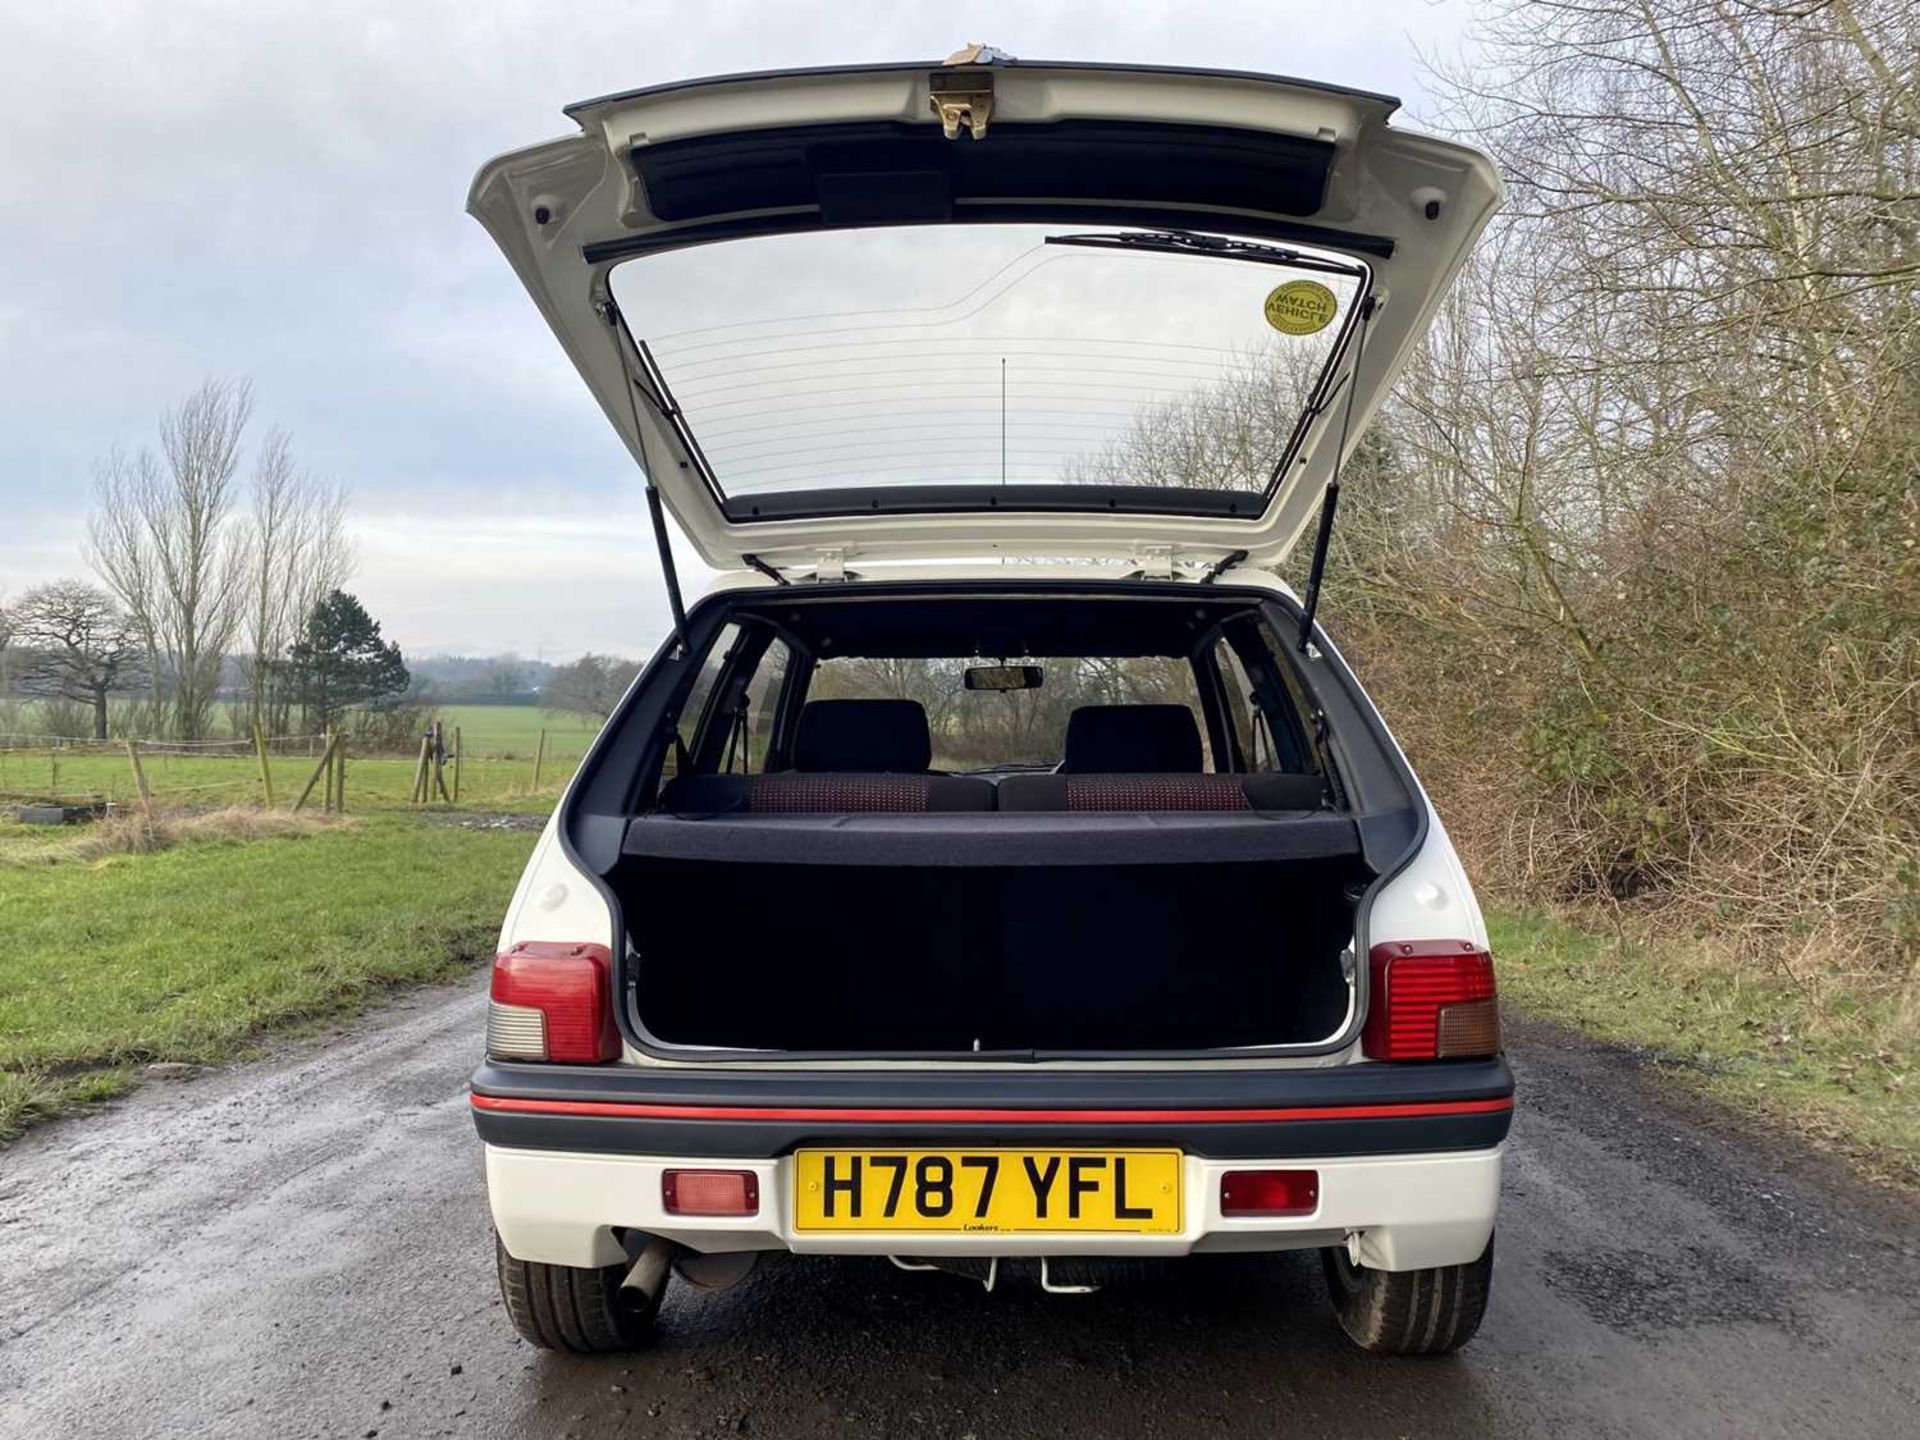 1990 Peugeot 205 GTi 1.6 Only 56,000 miles, same owner for 16 years - Image 17 of 81